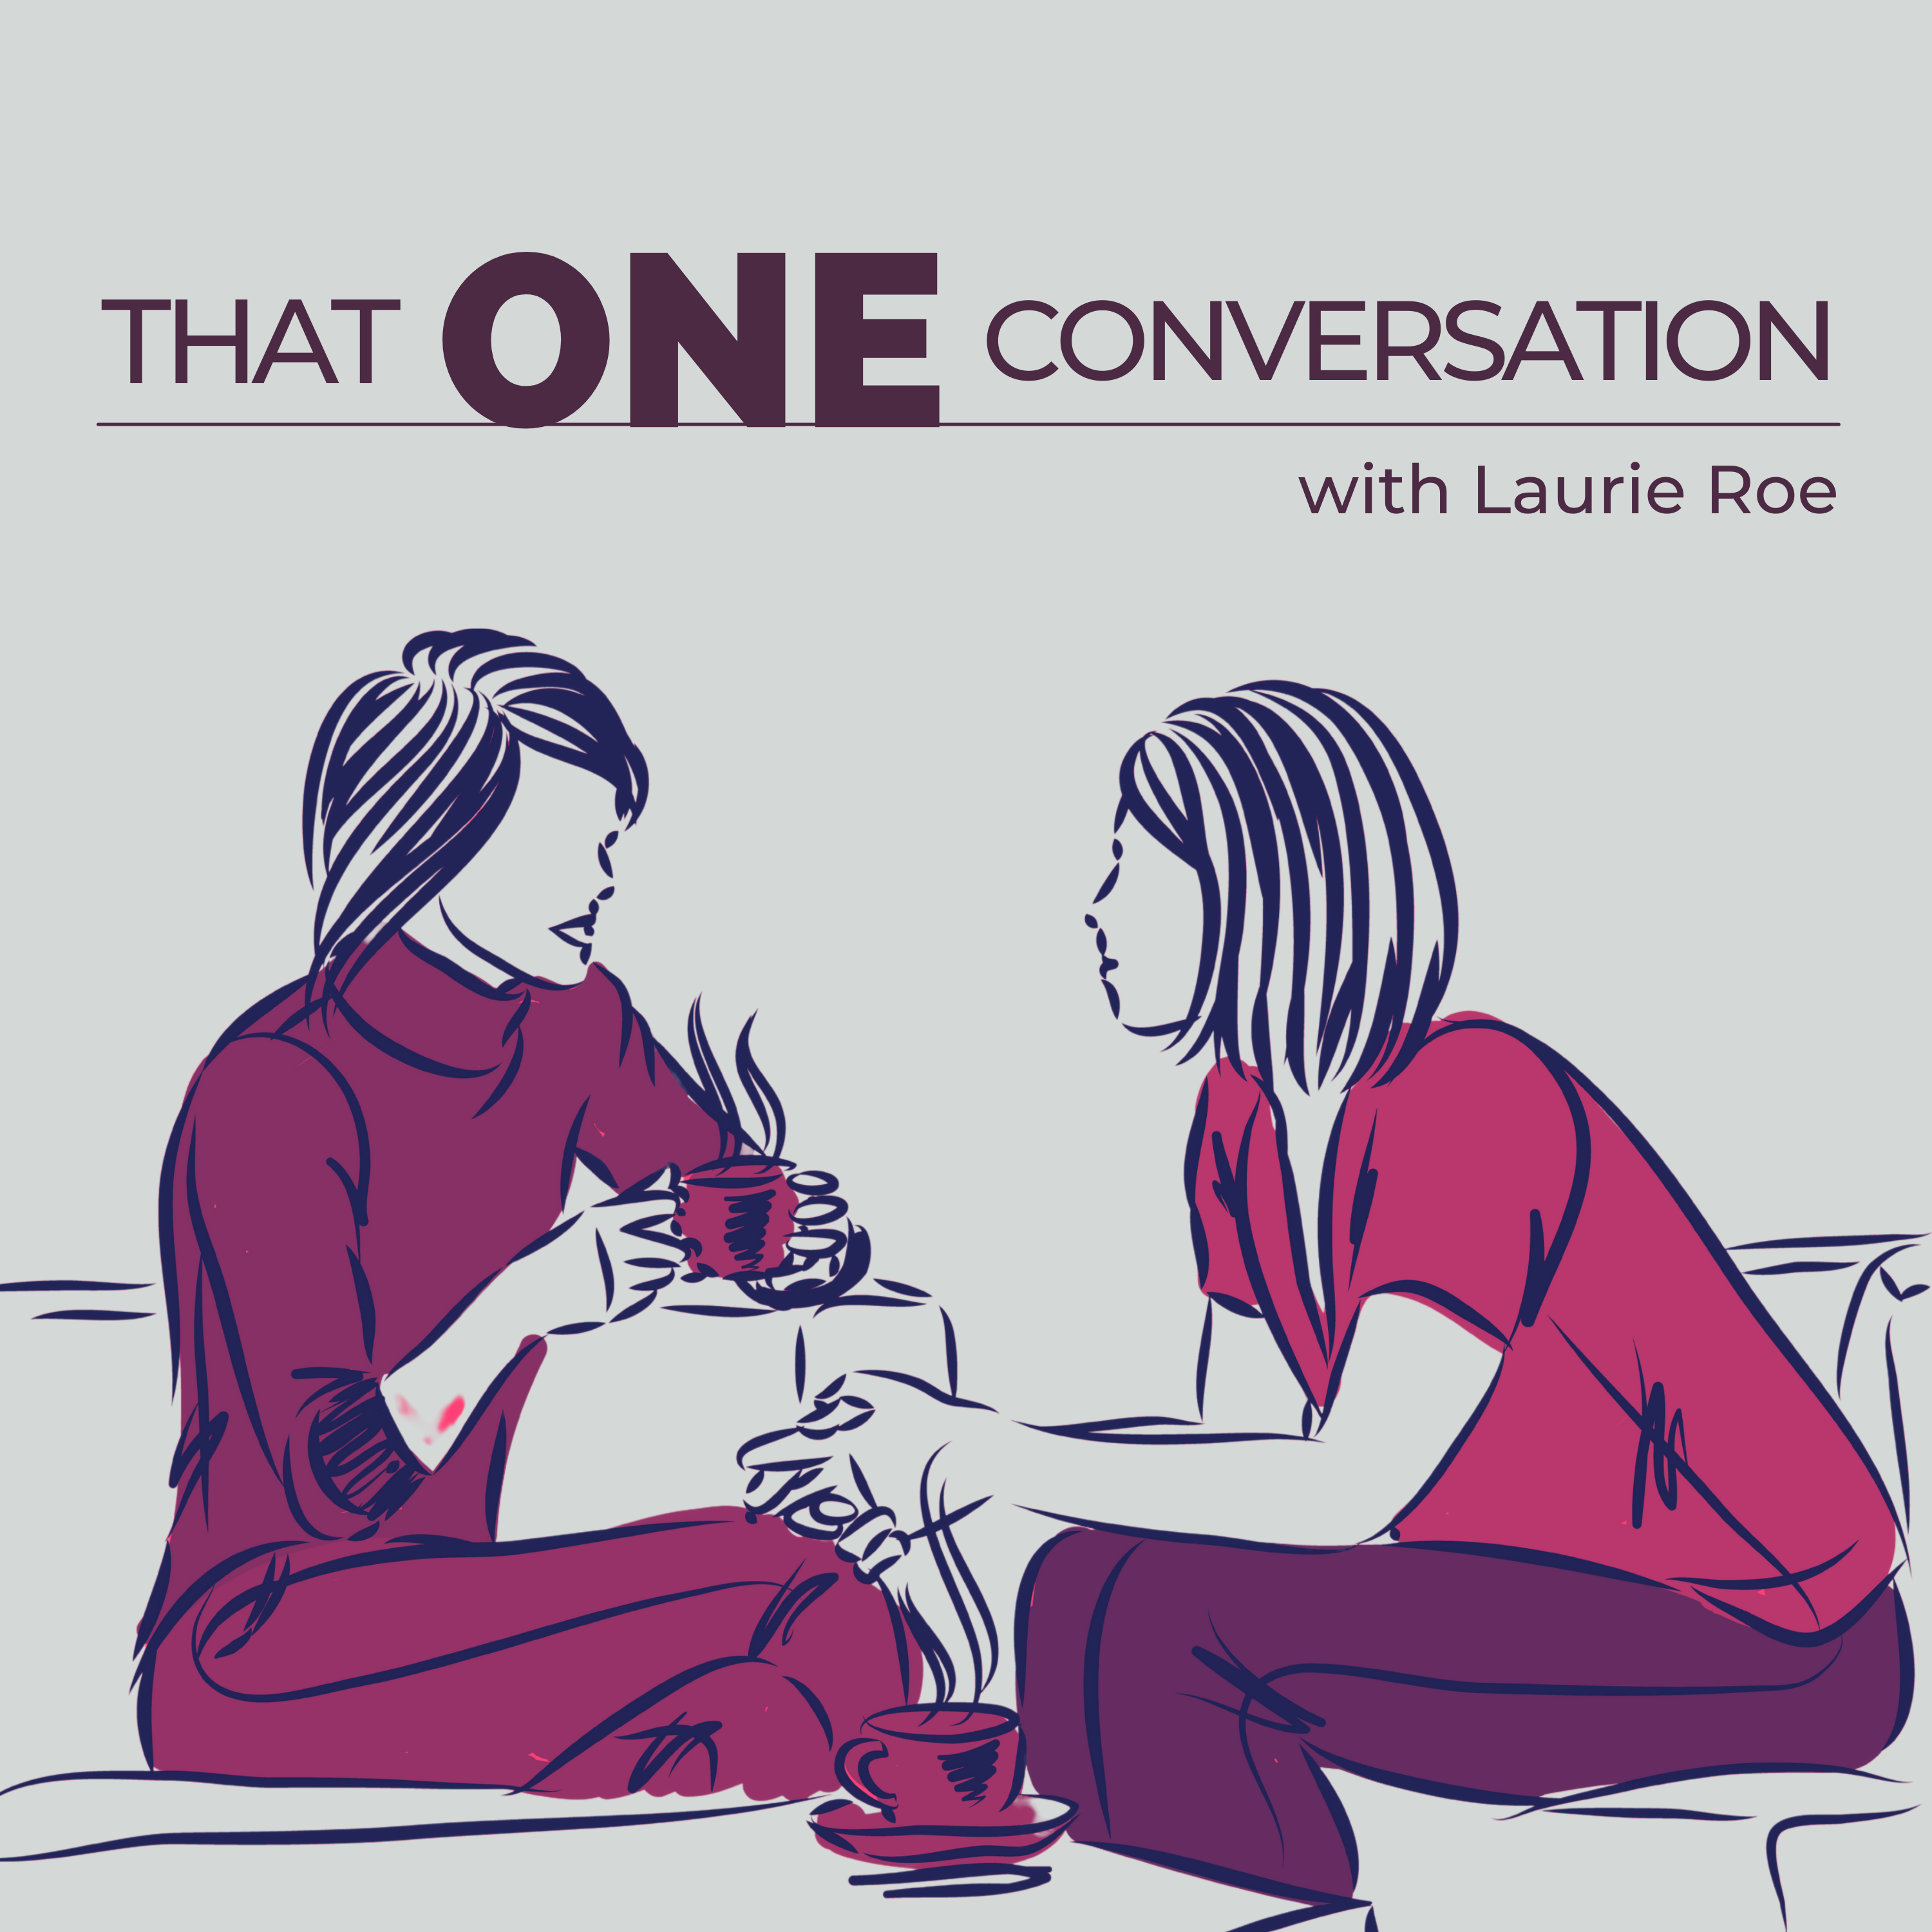 That ONE Conversation Introduction Trailer